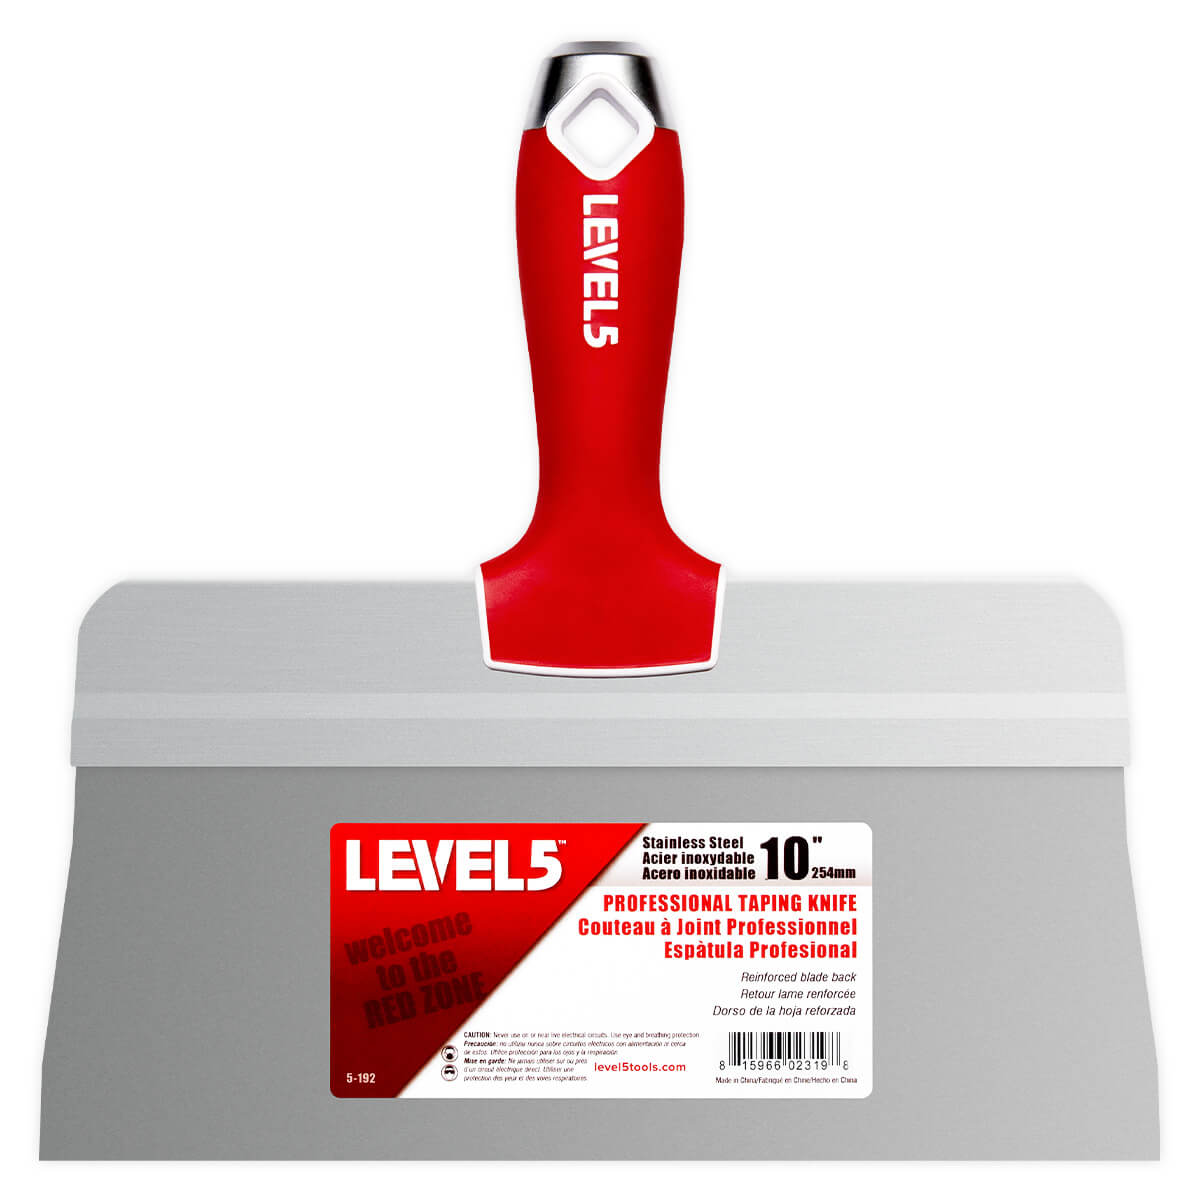 LEVEL5 10-INCH BIG BACK TAPING KNIFE | STAINLESS STEEL | 5-192